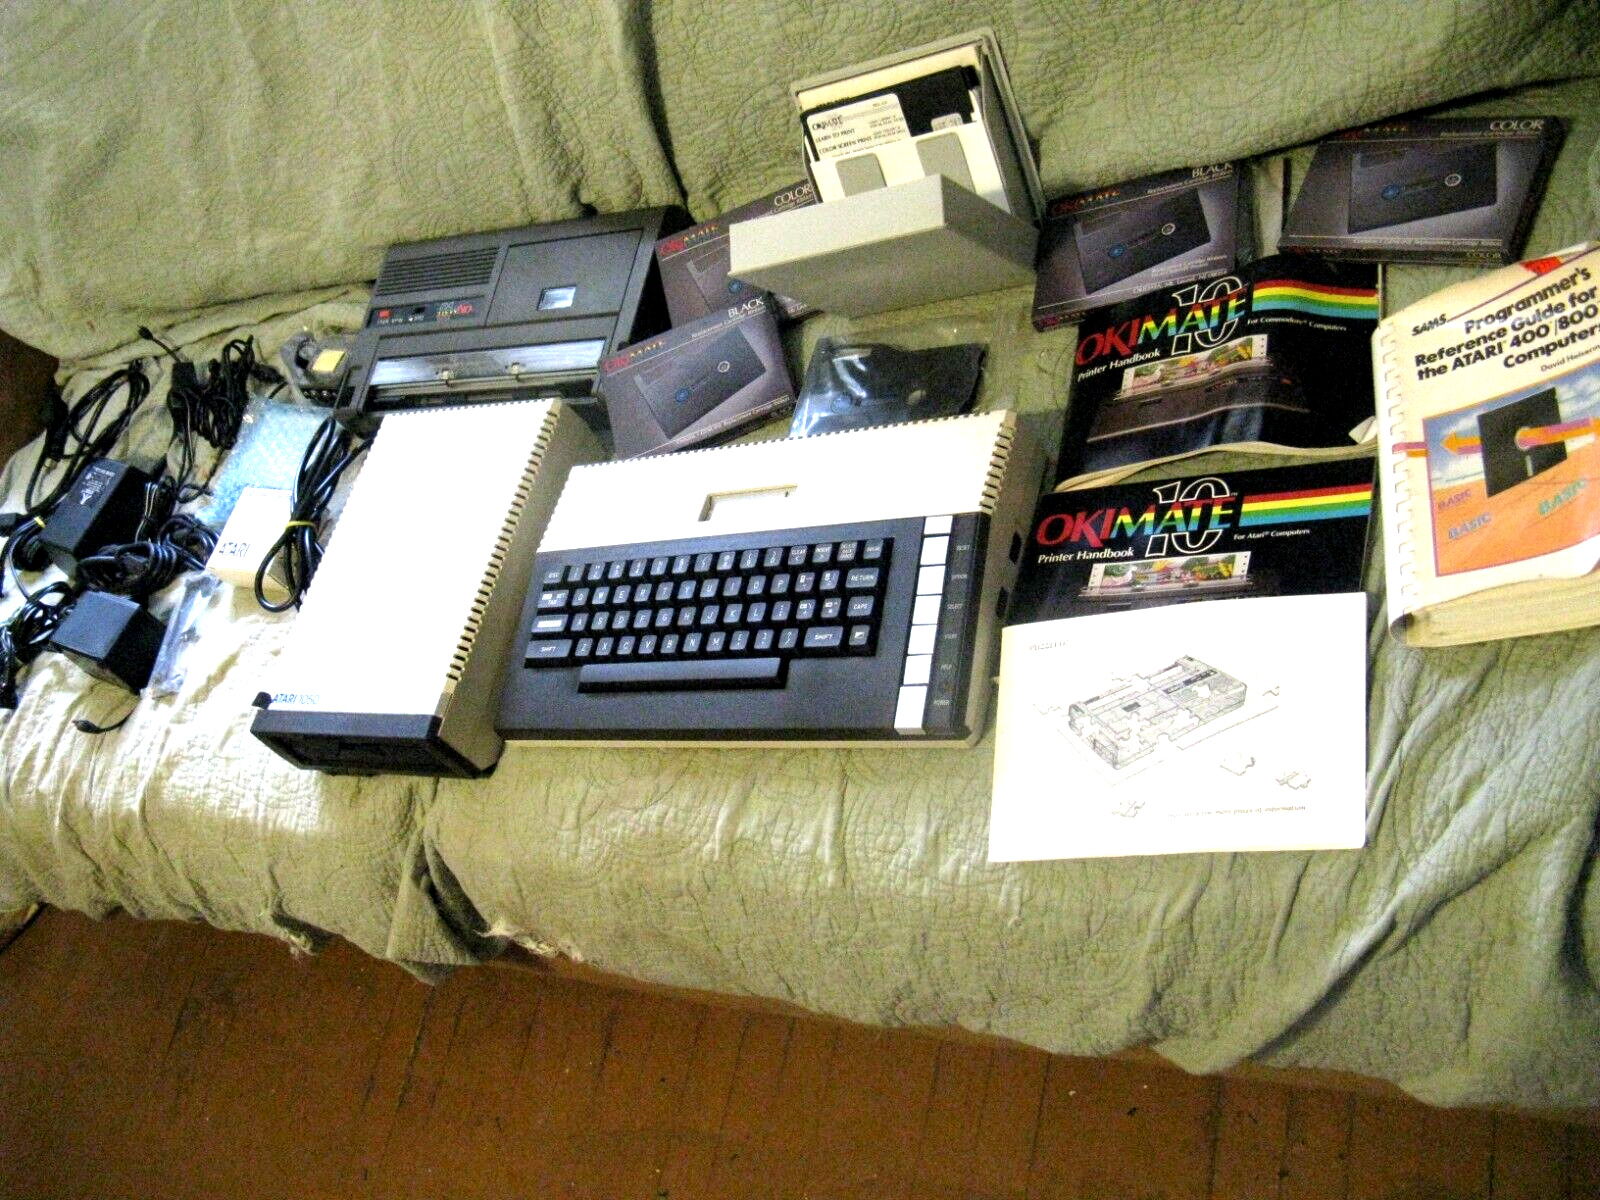 Vintage Lot of Atari 800XL Computer 1050 Floppy Disk Drive & accessories